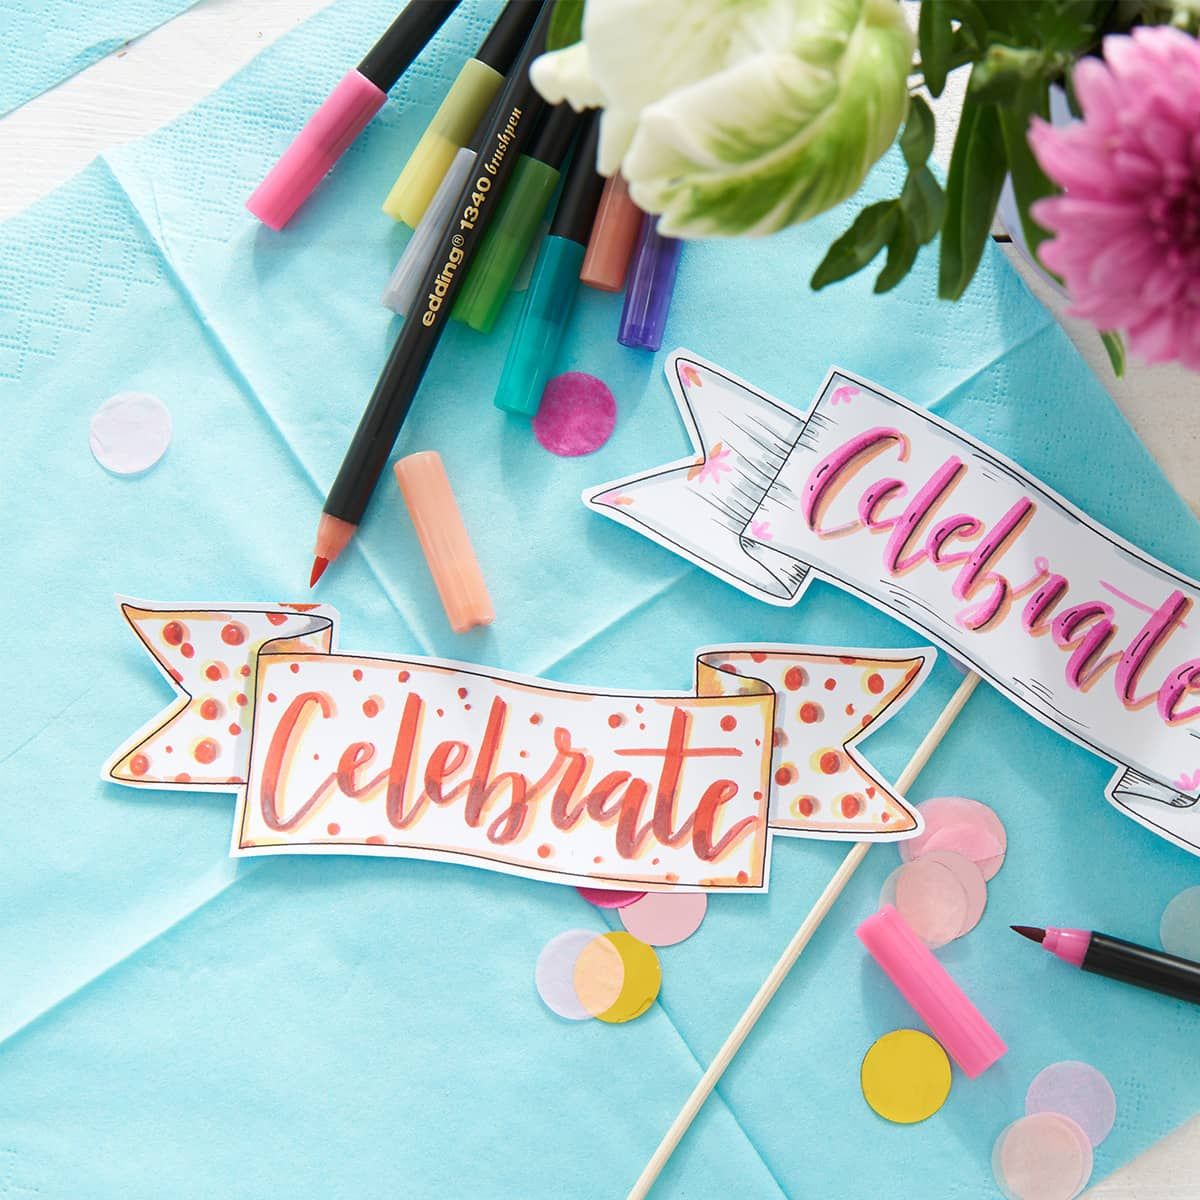 Perfect for lettering and coloring!